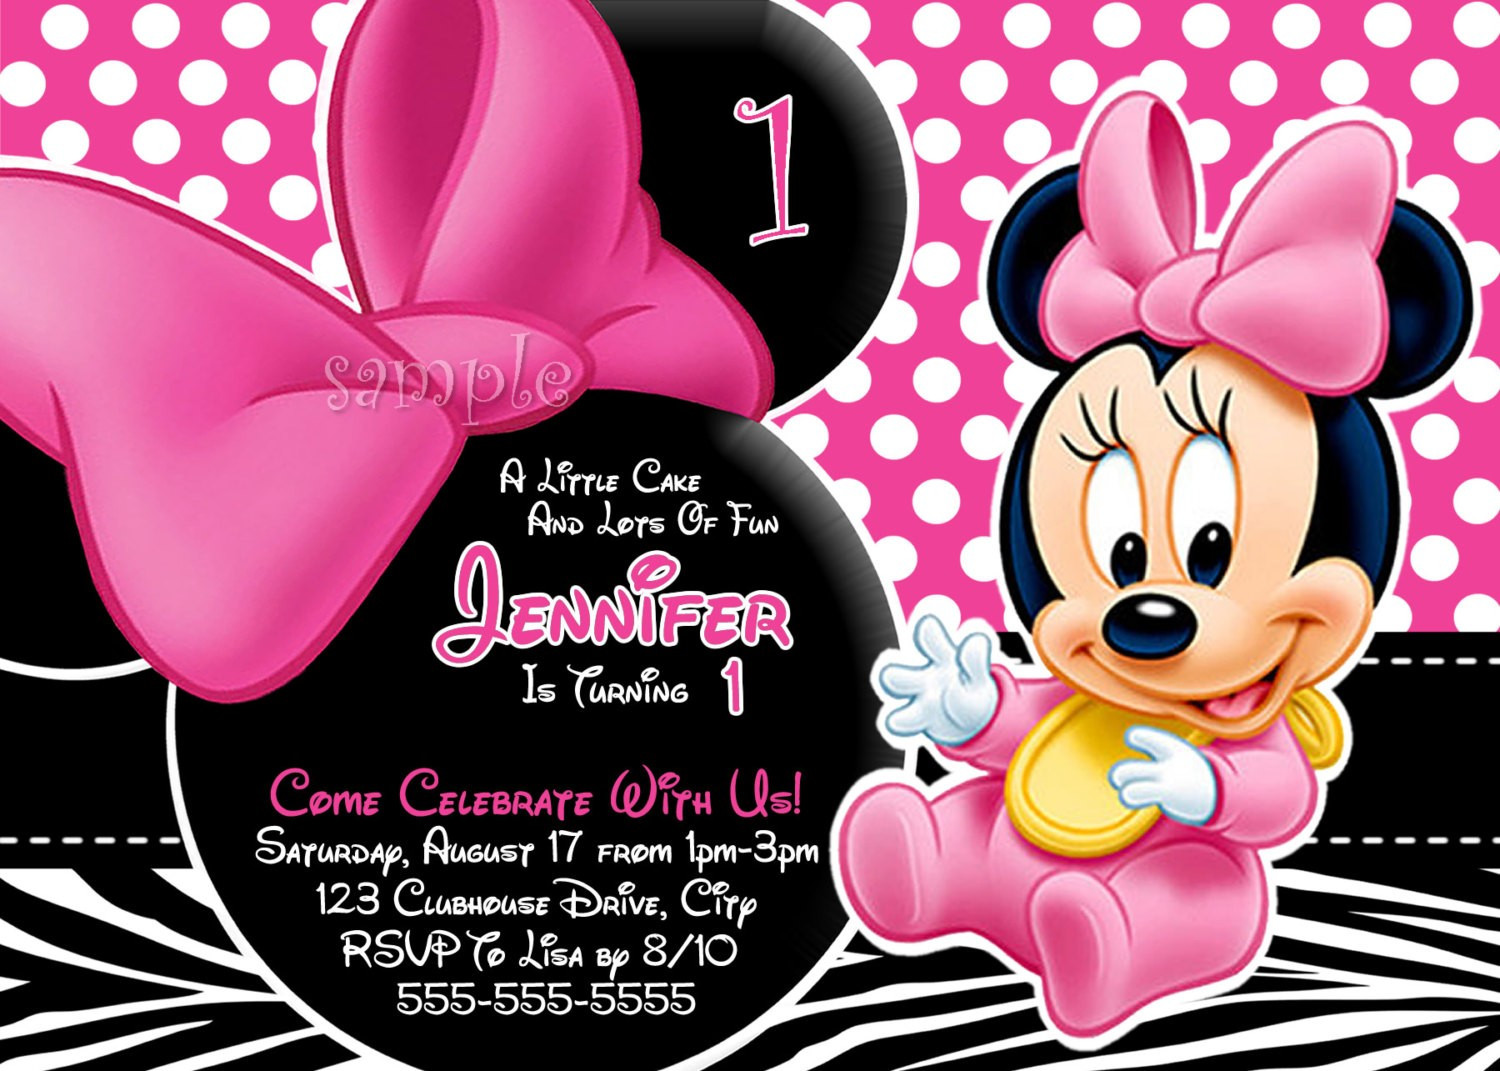 Baby Minnie Mouse 1st Birthday Invitations
 Personalized Minnie Mouse First Birthday Invitations